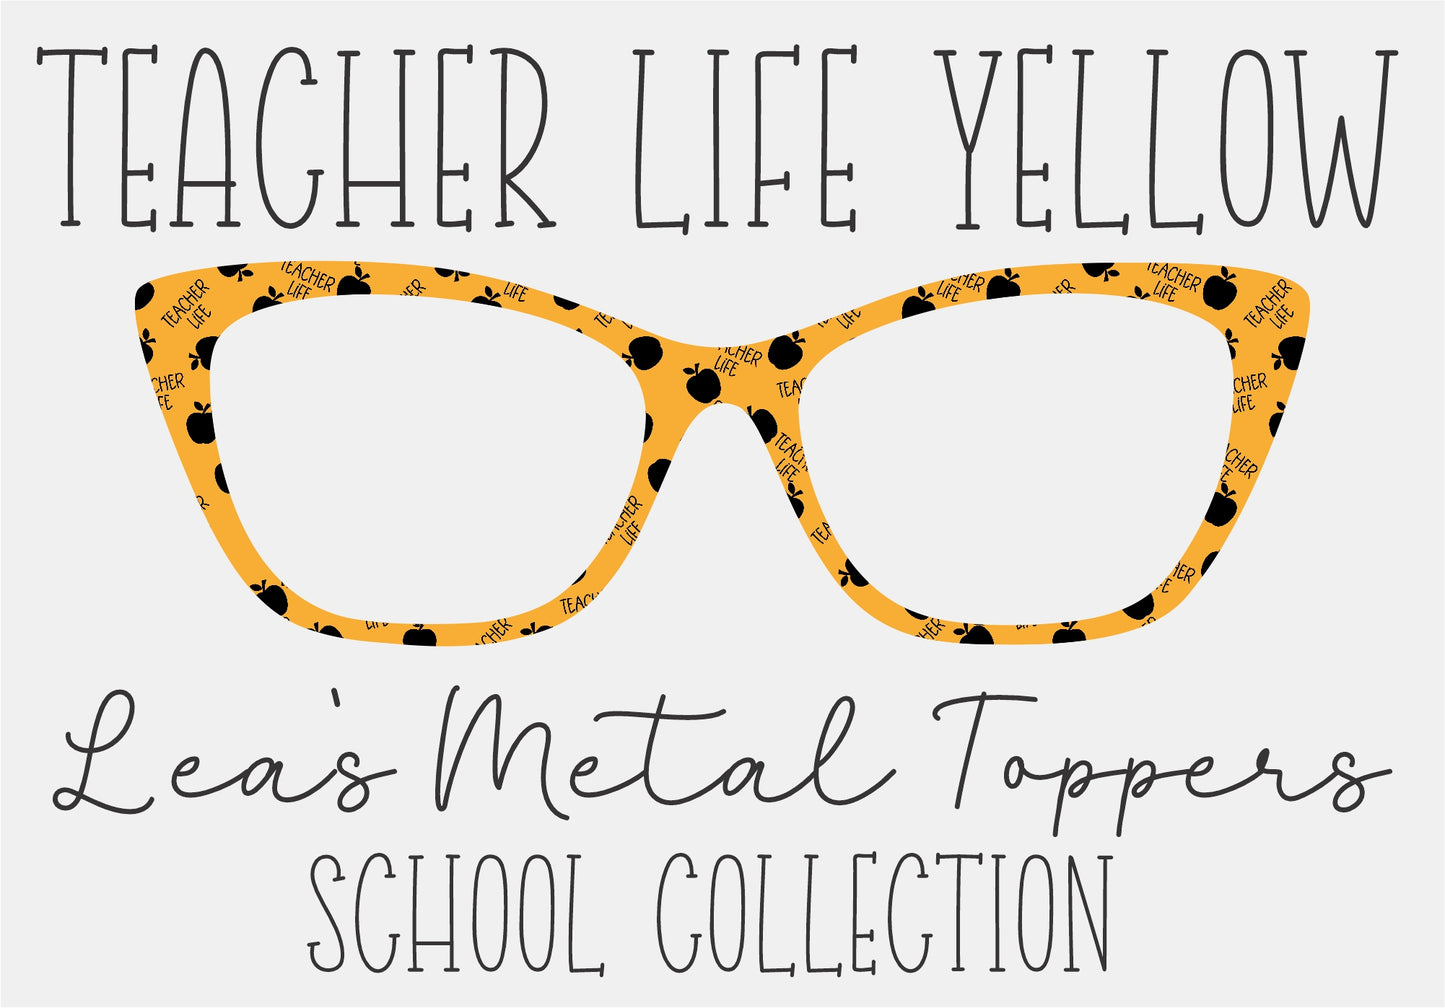 TEACHER LIFE YELLOW Eyewear Frame Toppers COMES WITH MAGNETS